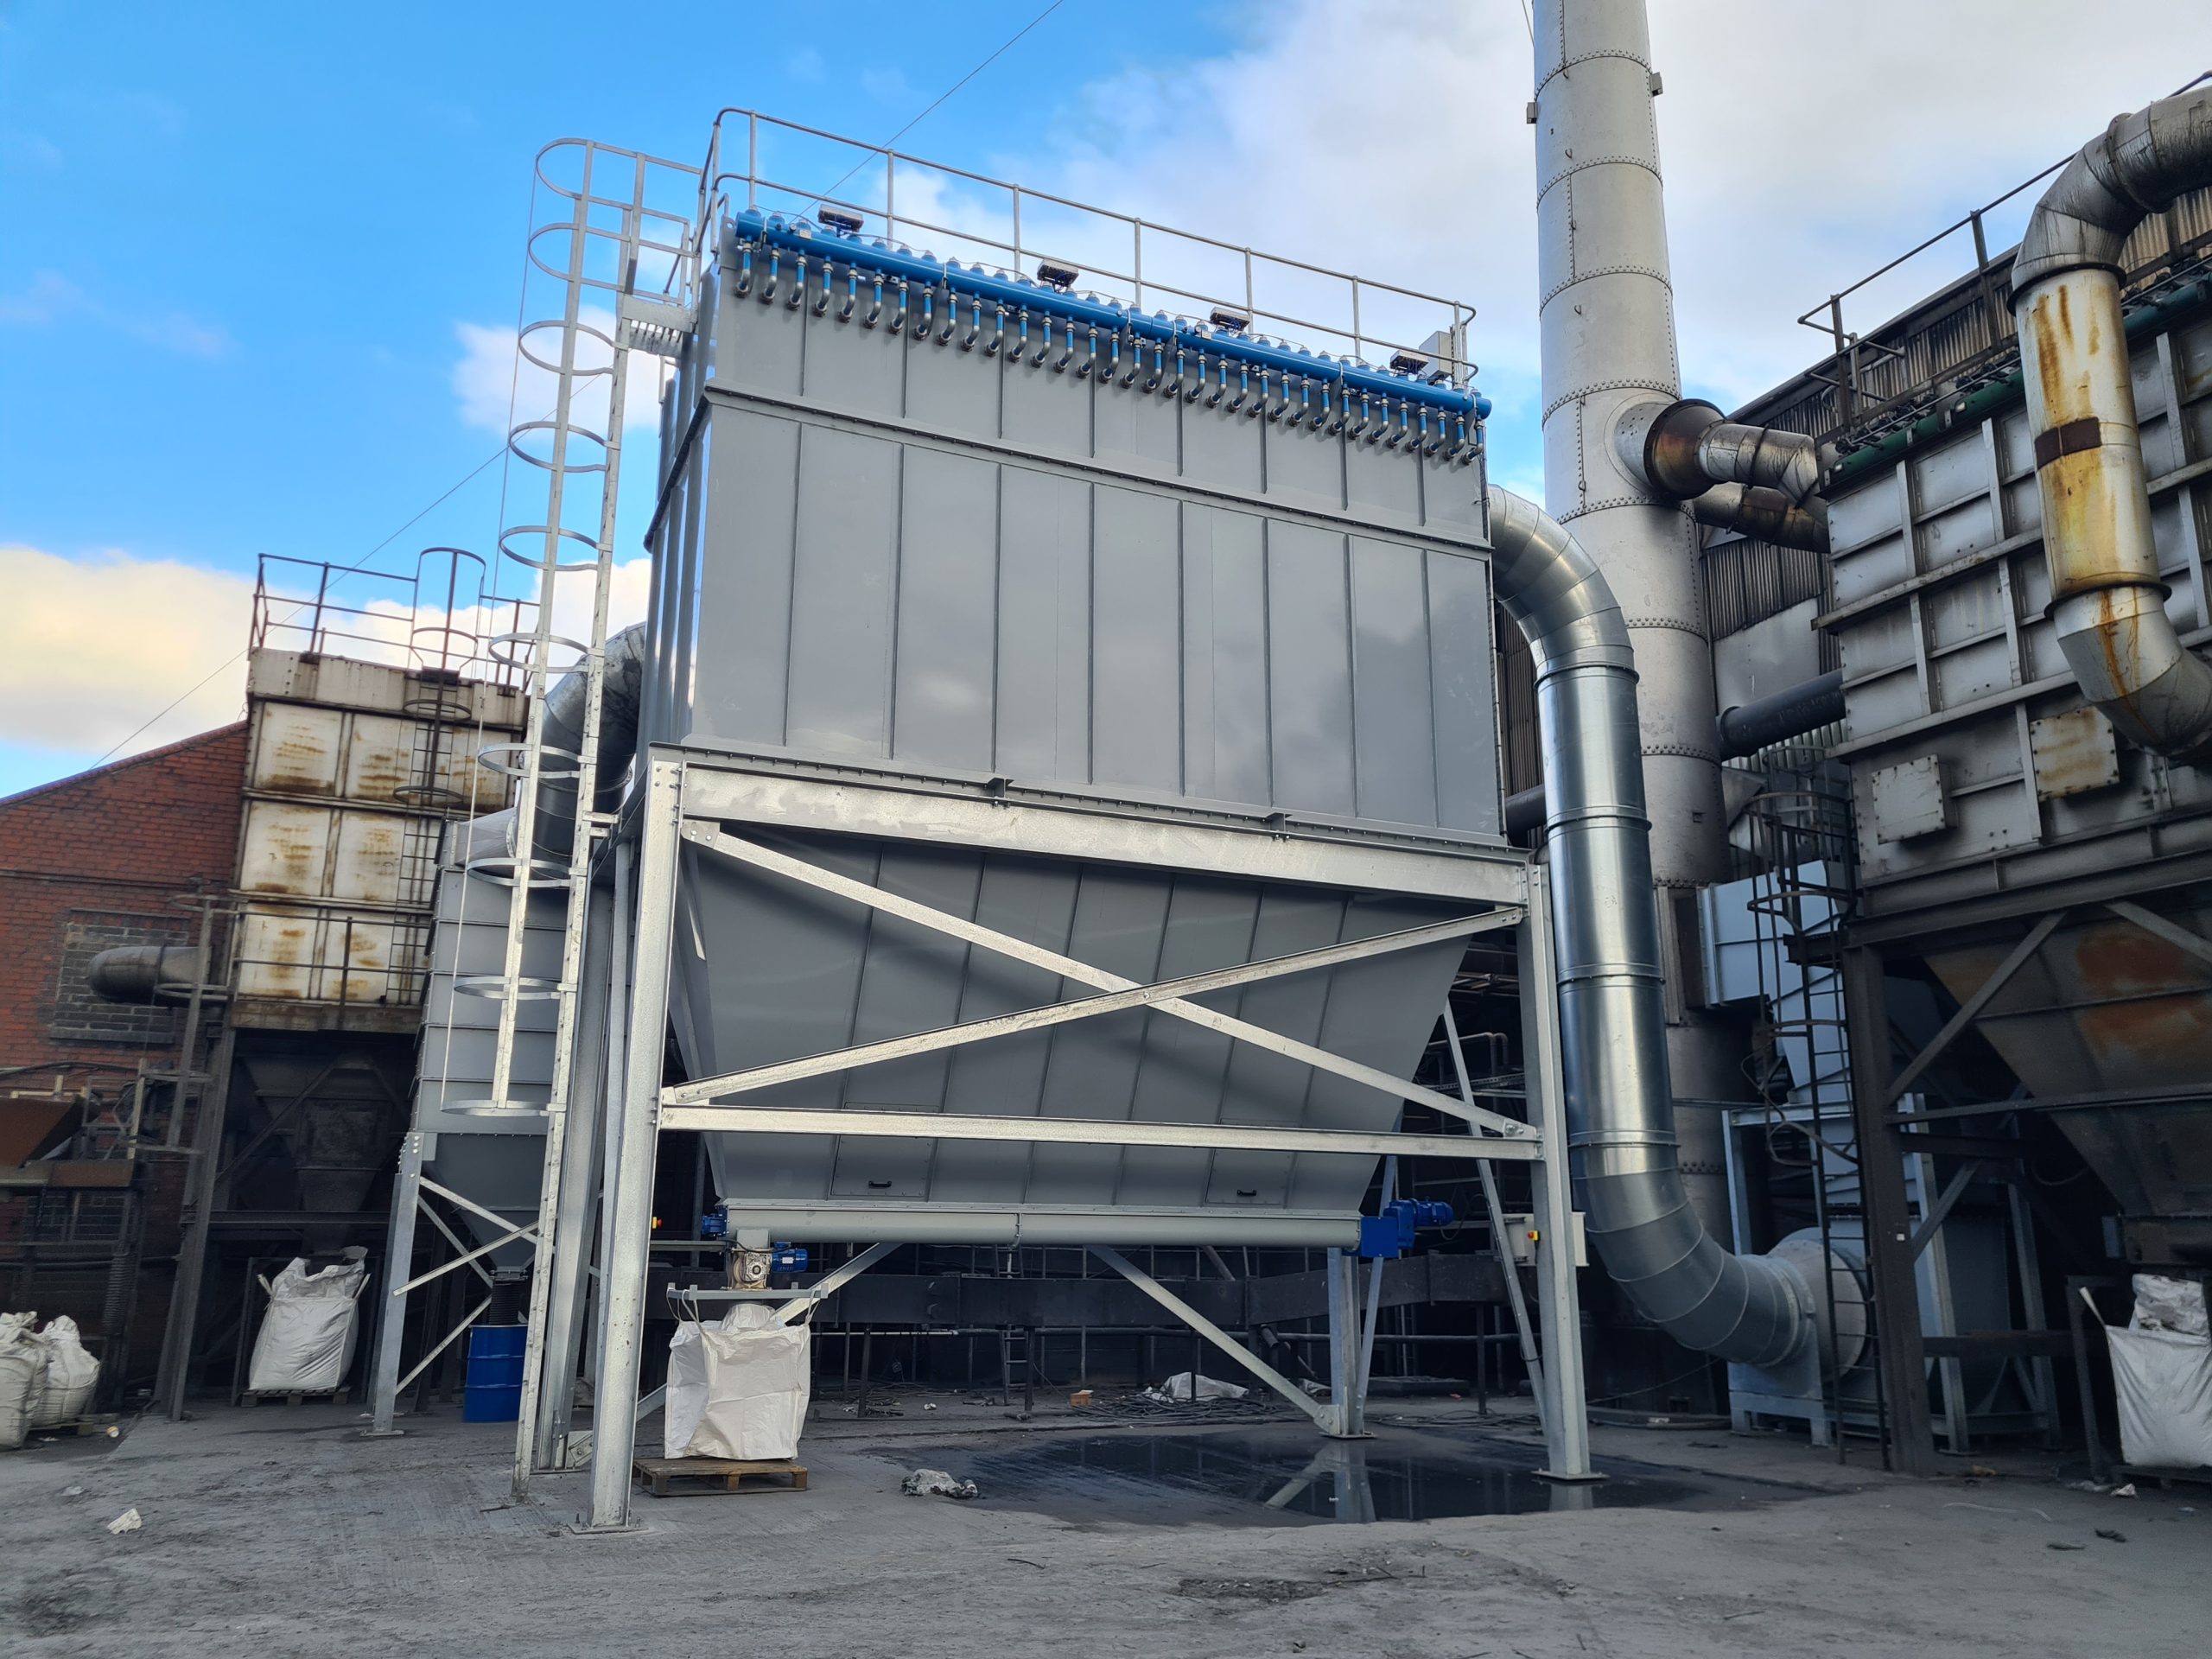 Bag Filter,Baghouse,pulse jet, bag filter, dust air filtration, filtration, tamworth, west midlands, west midlands filtration, LEV, LEV reporting, LEV testing. cleaning air, clean air, safe working environments, nederman, dust collectors, nordfab, wet collectors, fume extraction